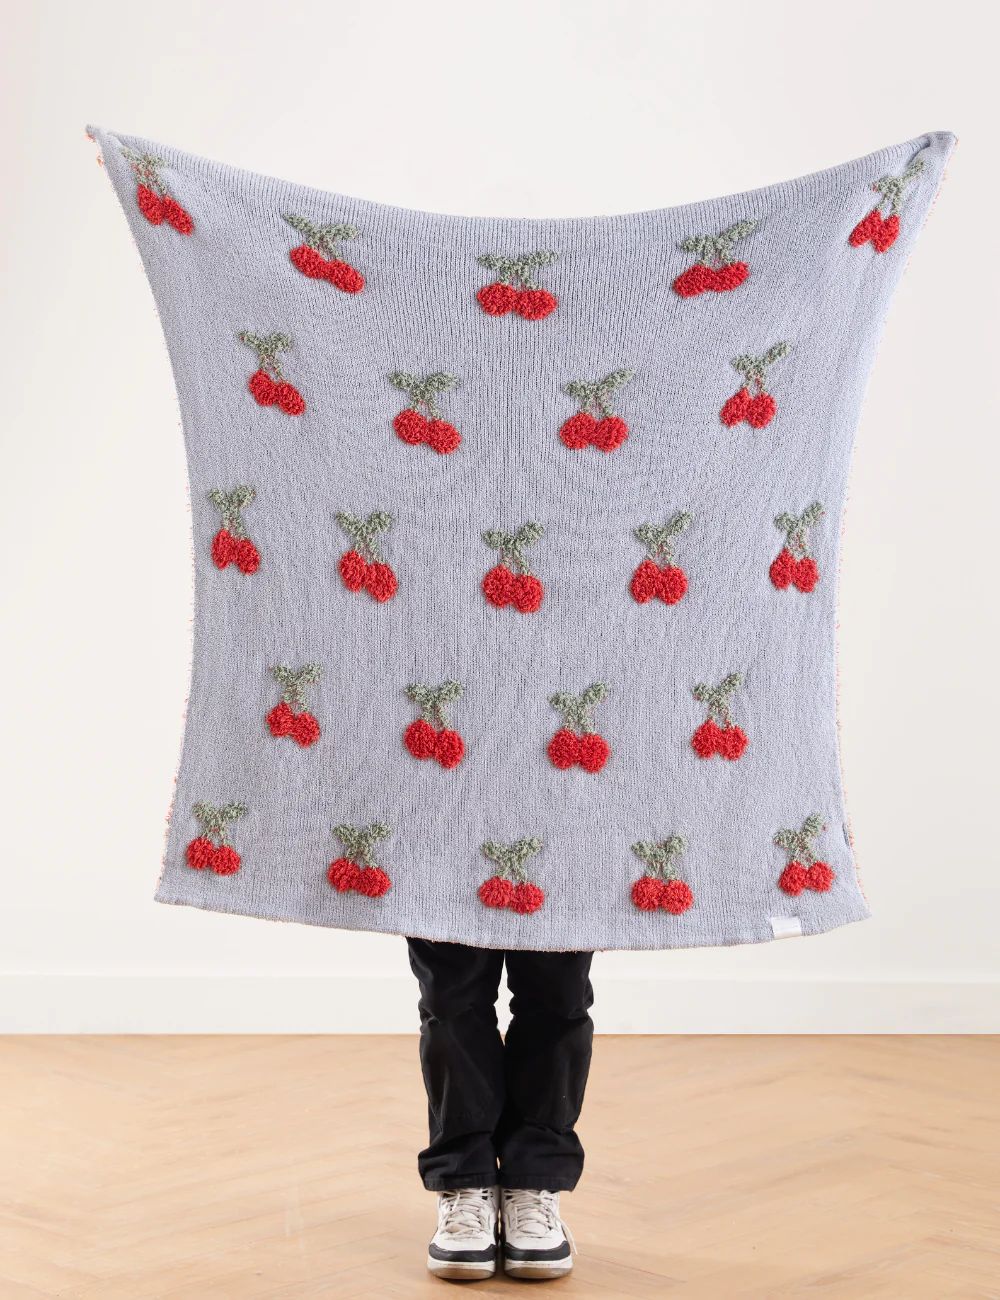 Cherries Buttery Blanket | The Styled Collection